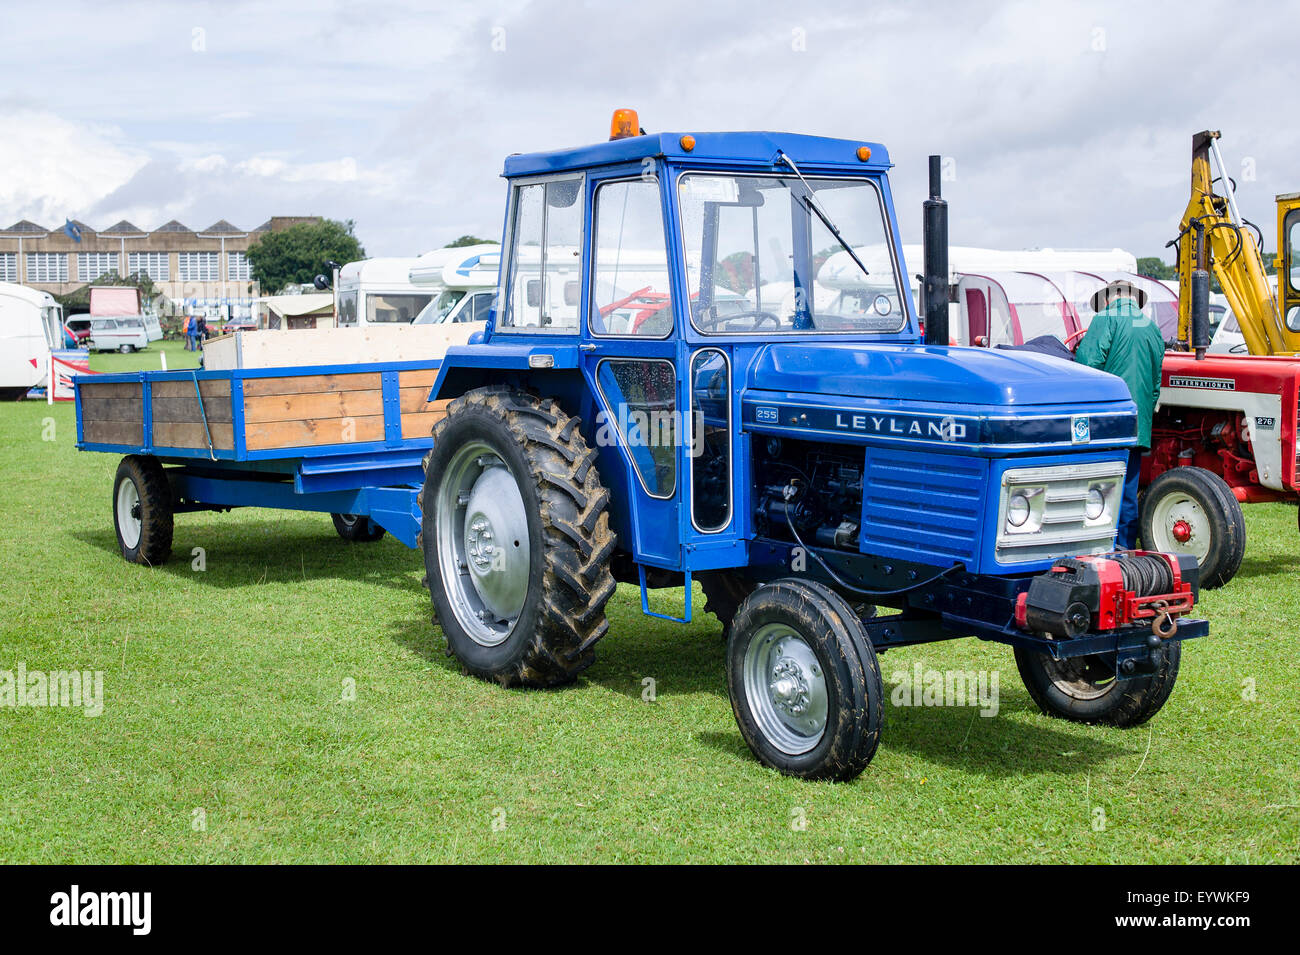 Leyland 255 agriculture tractor at an English show Stock Photo